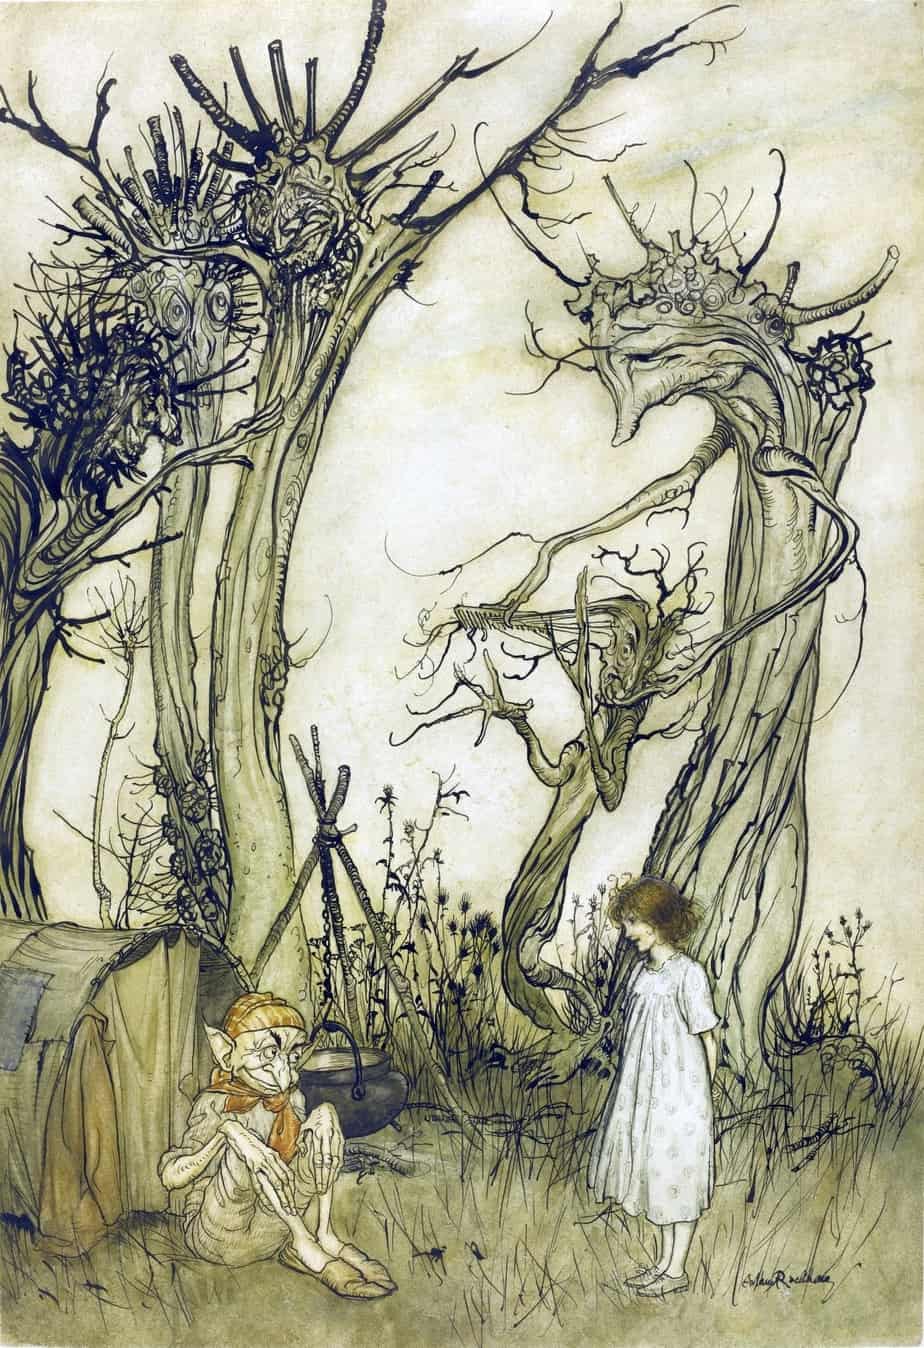 Arthur Rackham (British book illustrator) 1867 - 1939, The Man In The Wilderness, 1913, Mother Goose 1913 for the rhyme The man in the wilderness asked me How many strawberries grew in the sea